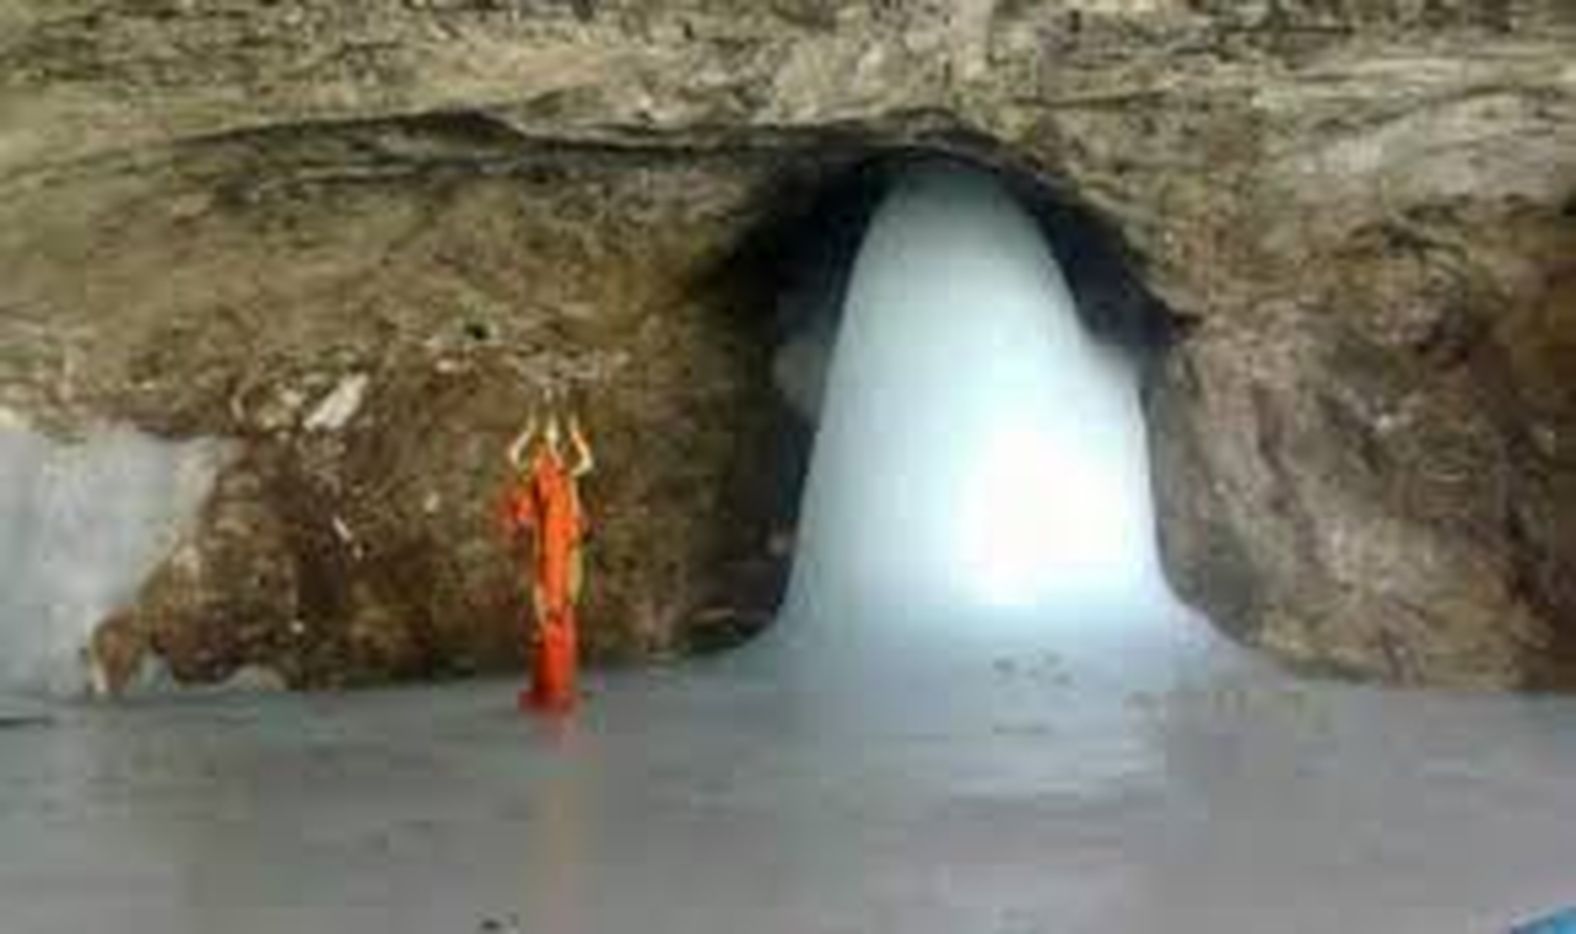  The number of devotees going to Amarnath Yatra will double